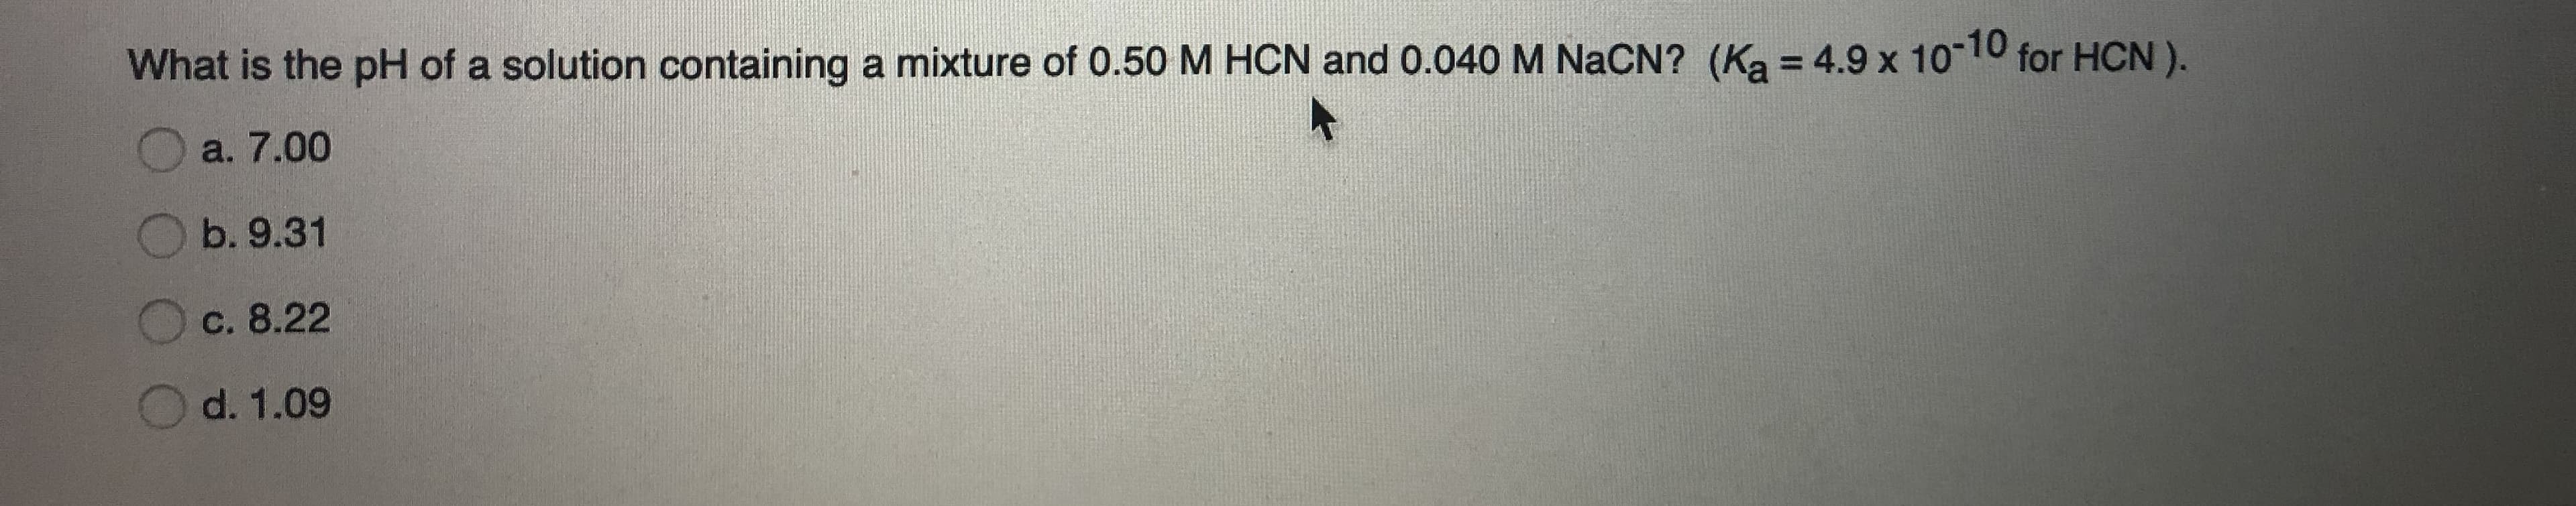 What is the pH of a solution containing a mixture of 0.50 M HCN and 0.040 M NaCN? (Ka = 4.9 x 1010 for HCN).
%3D
a. 7.00
b. 9.31
c. 8.22
d. 1.09
